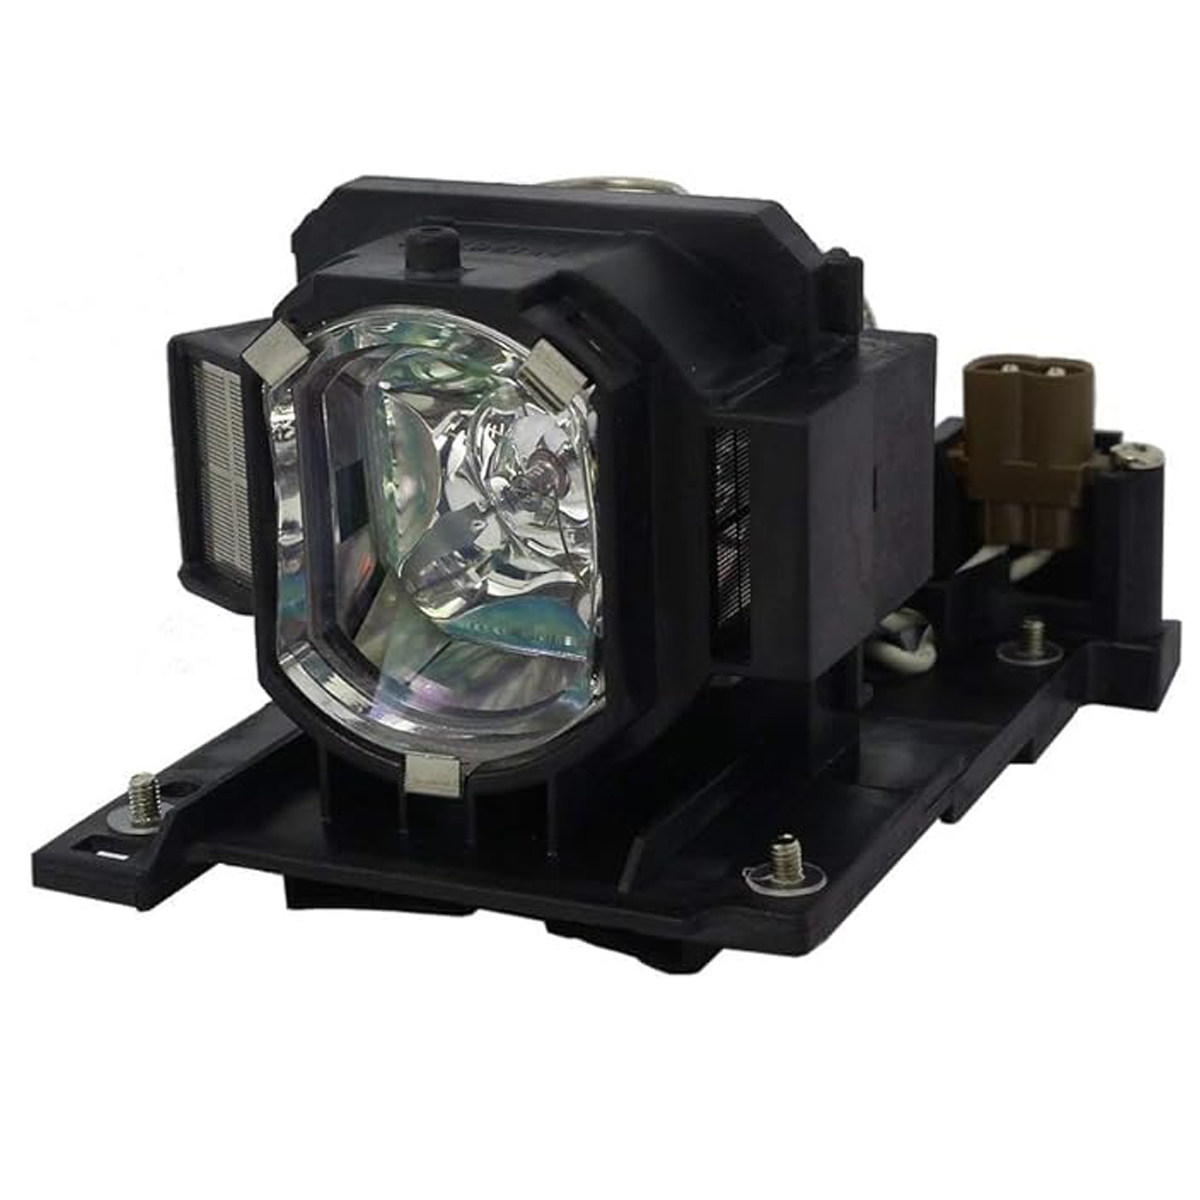 Replacement Projector lamp 78-6972-0008-3 For 3M X36 X46 CL67N PL92X